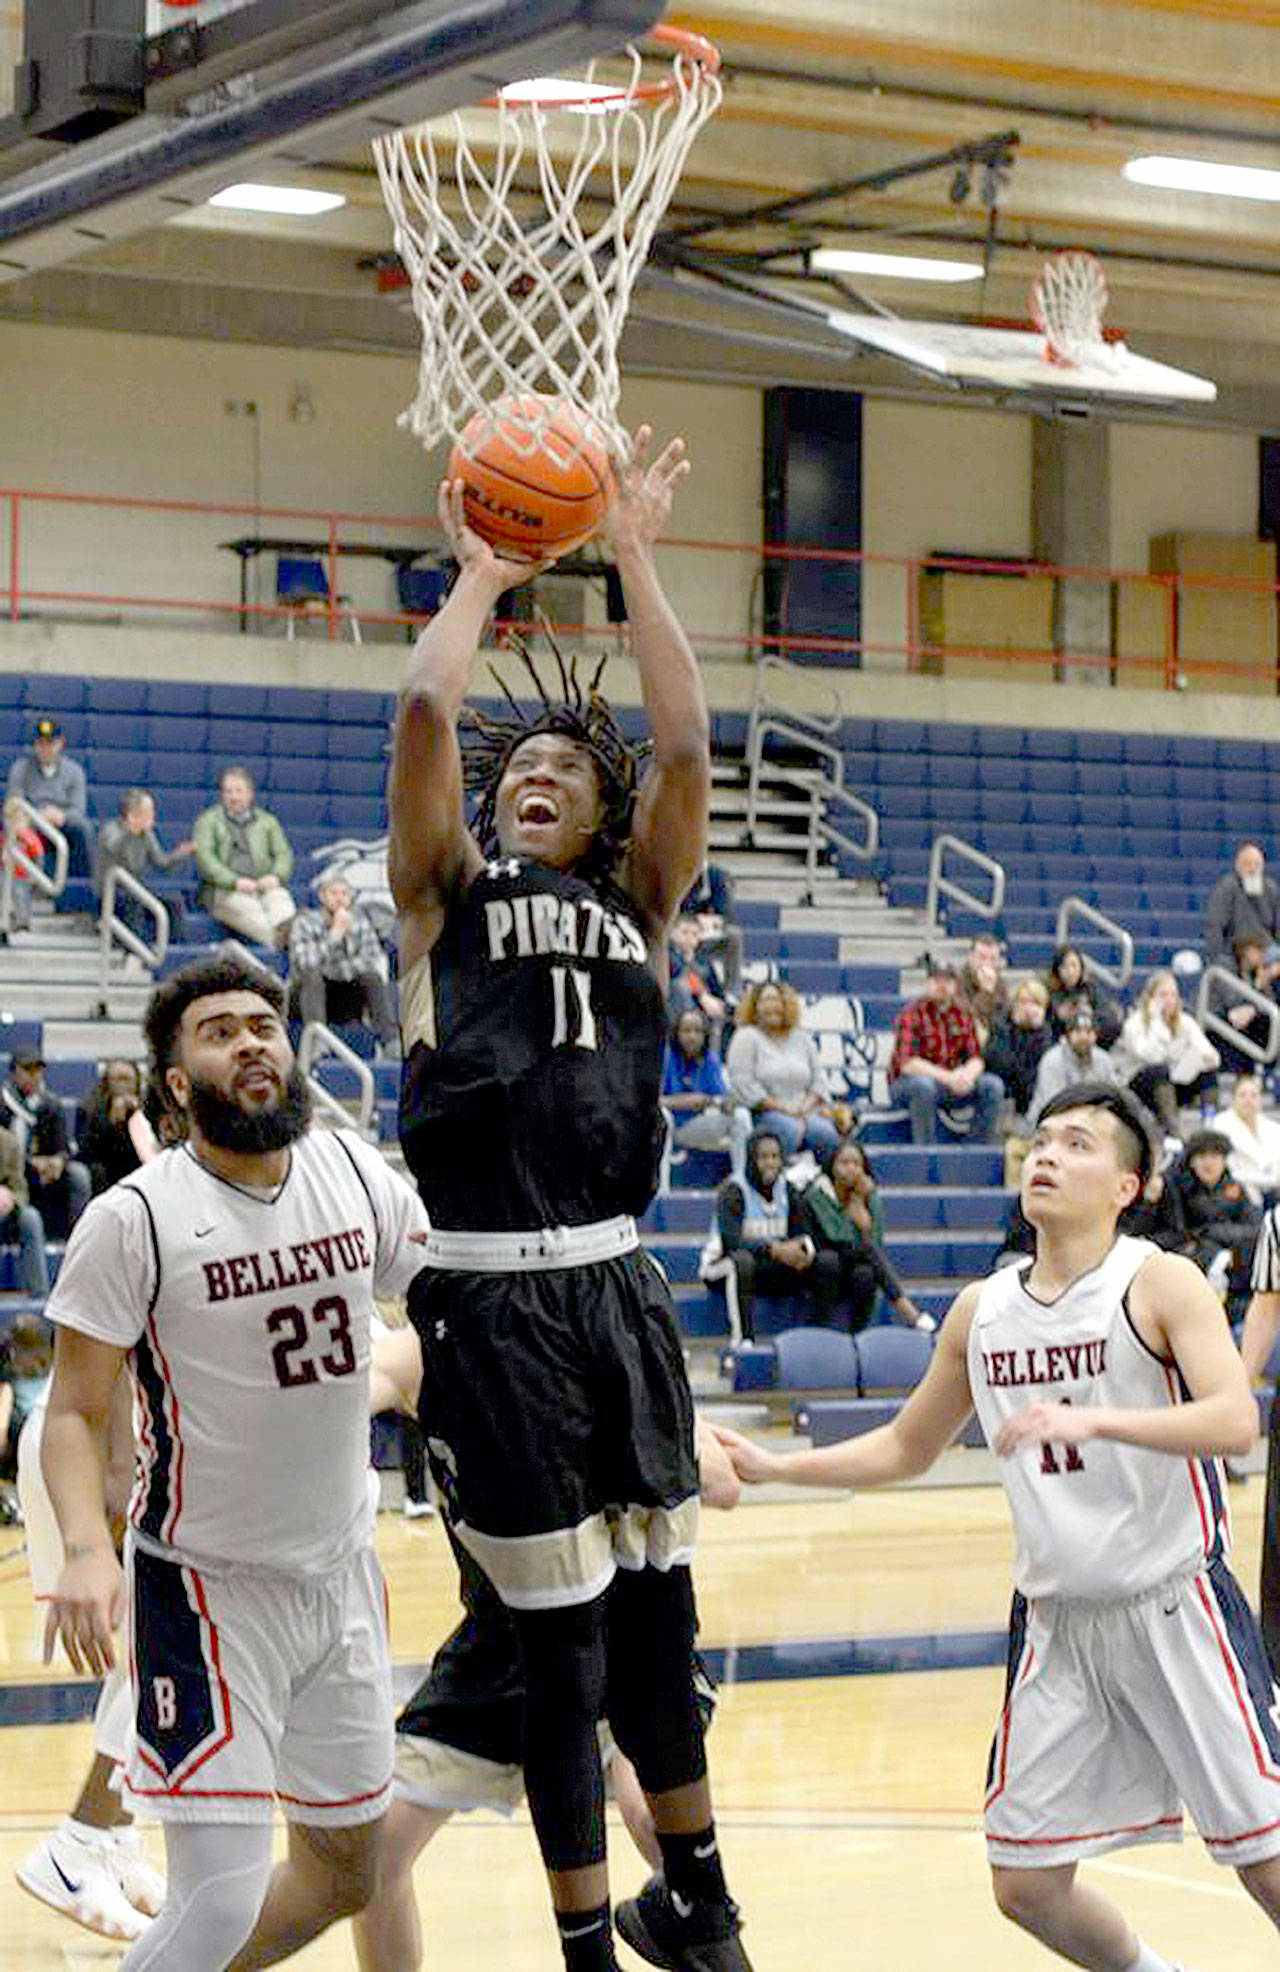 Rick Ross Peninsula’s Malik Moore grabs one of his 15 rebounds against Bellevue College as the Pirates won 69-68 to qualify for the NWAC Tournament.